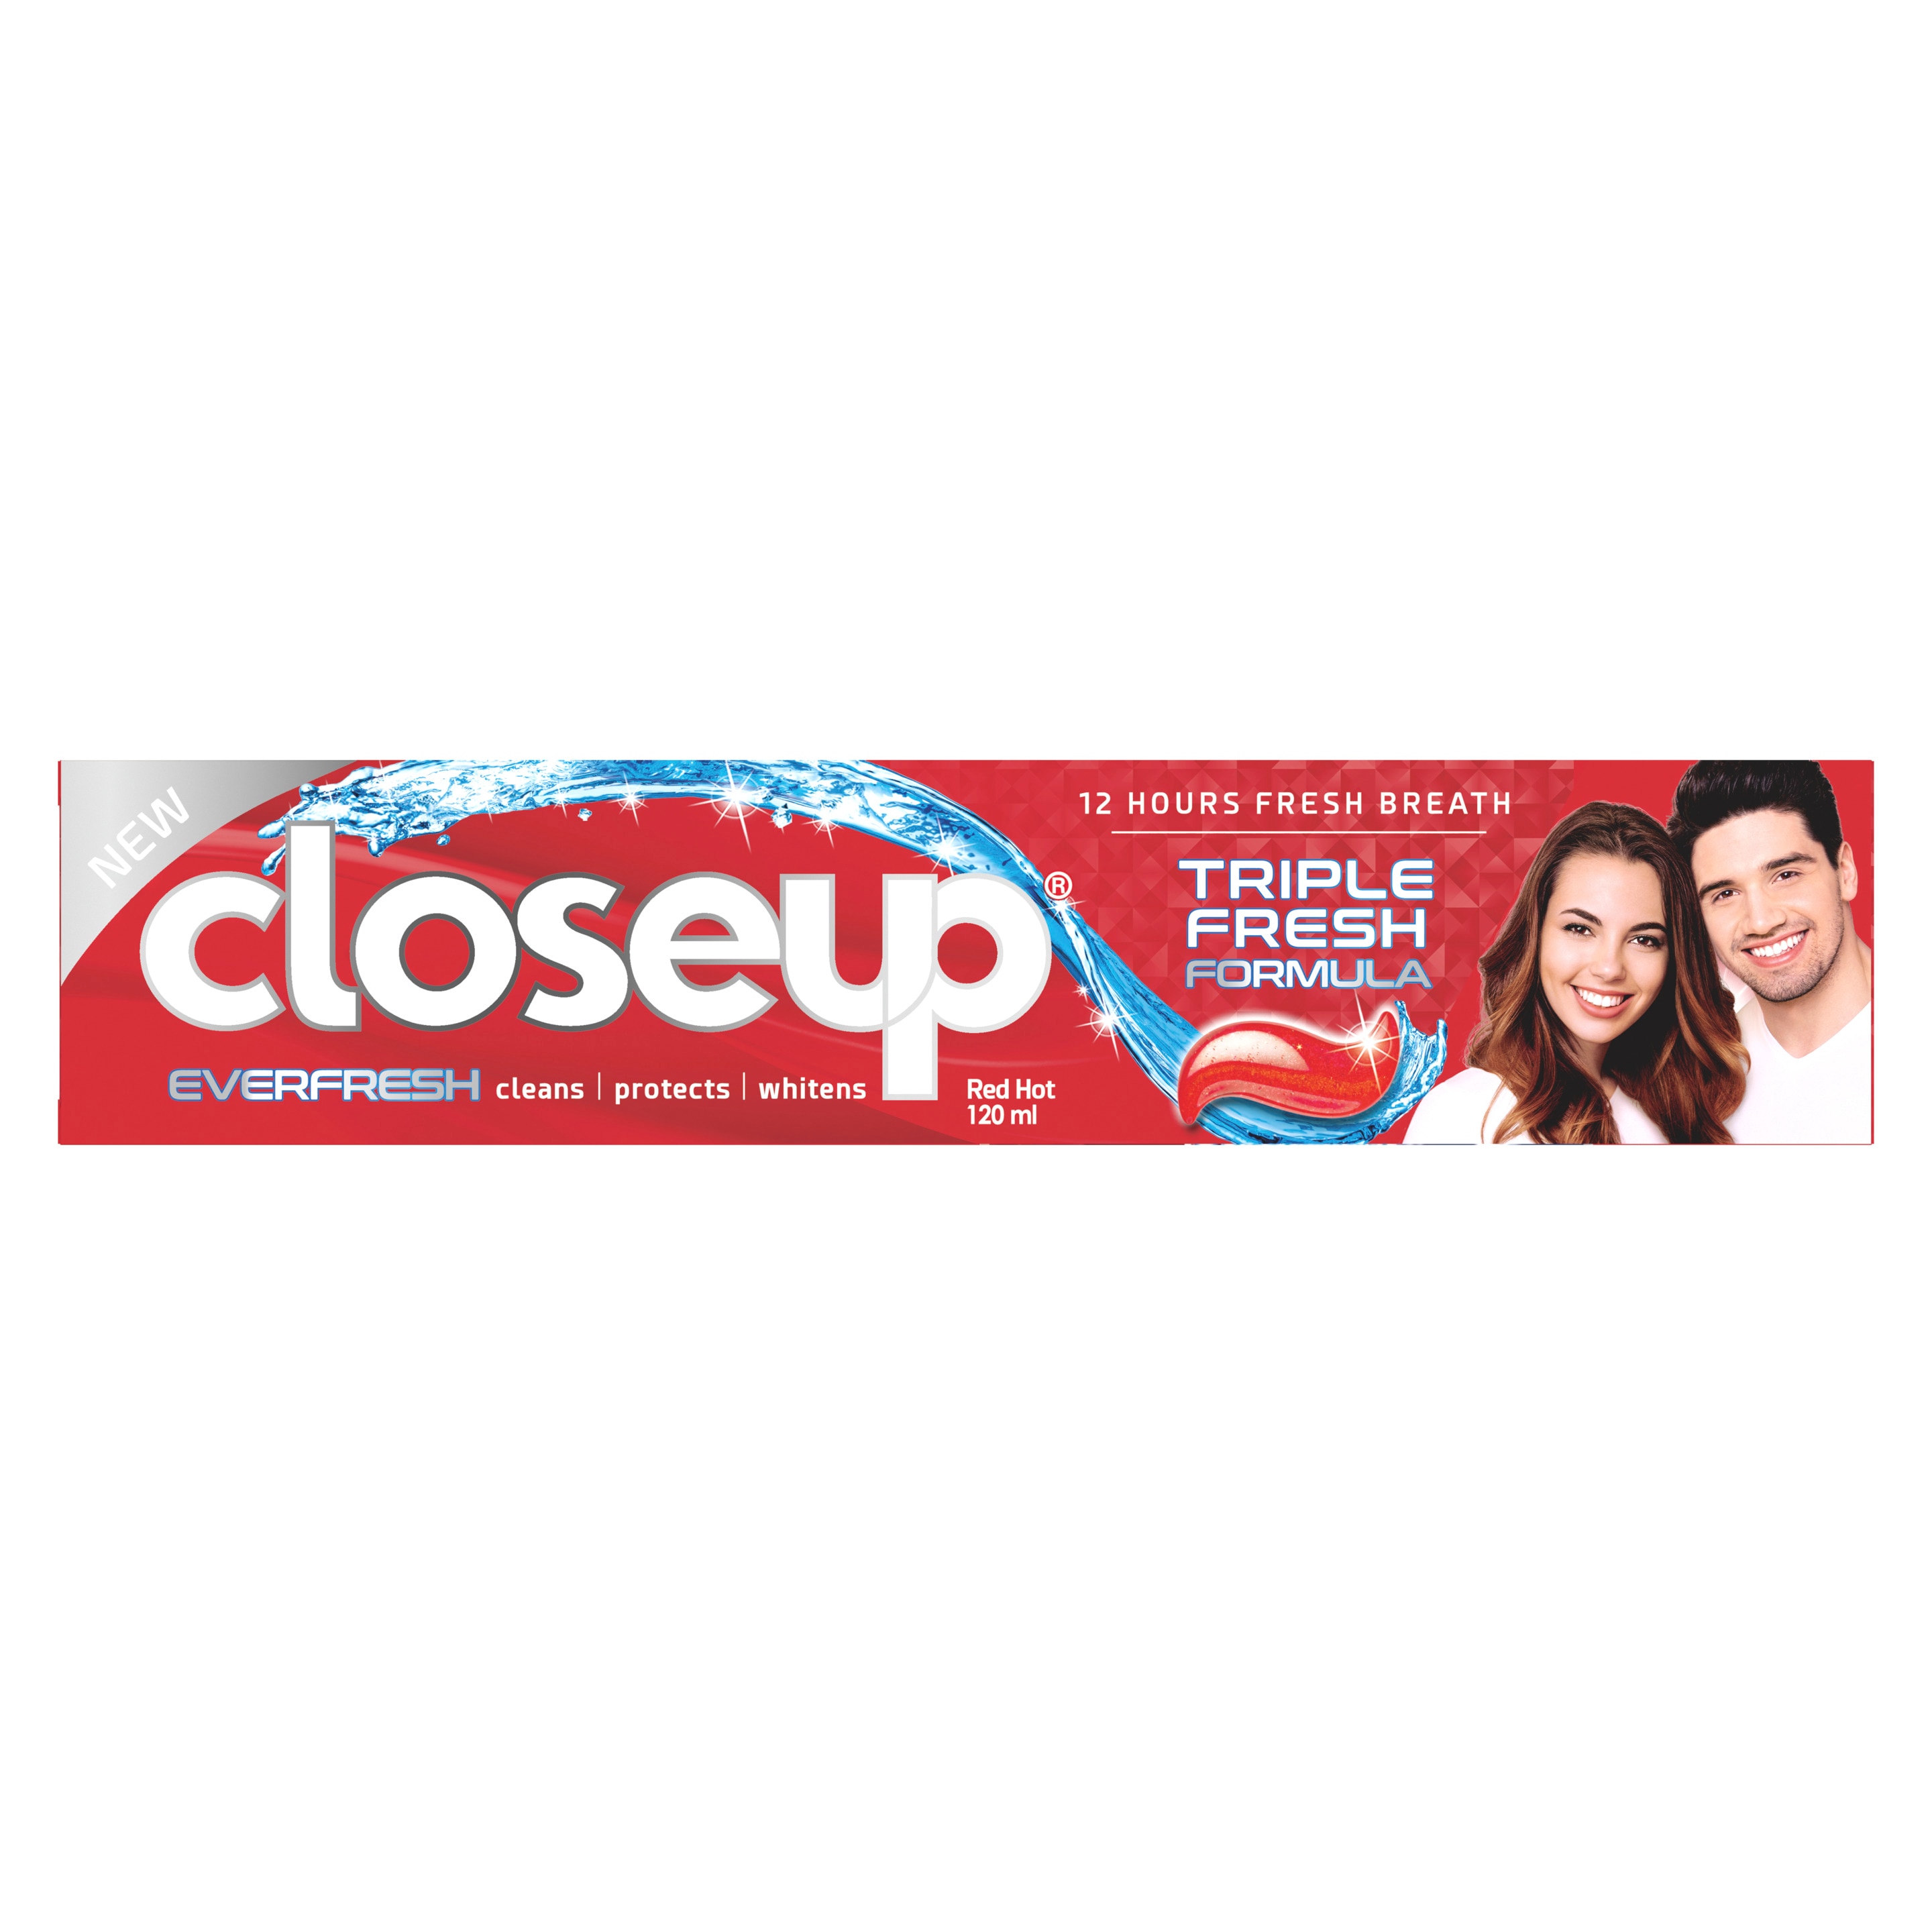 CLOSE UP Triple Fresh Formula Gel Toothpaste, Red Hot